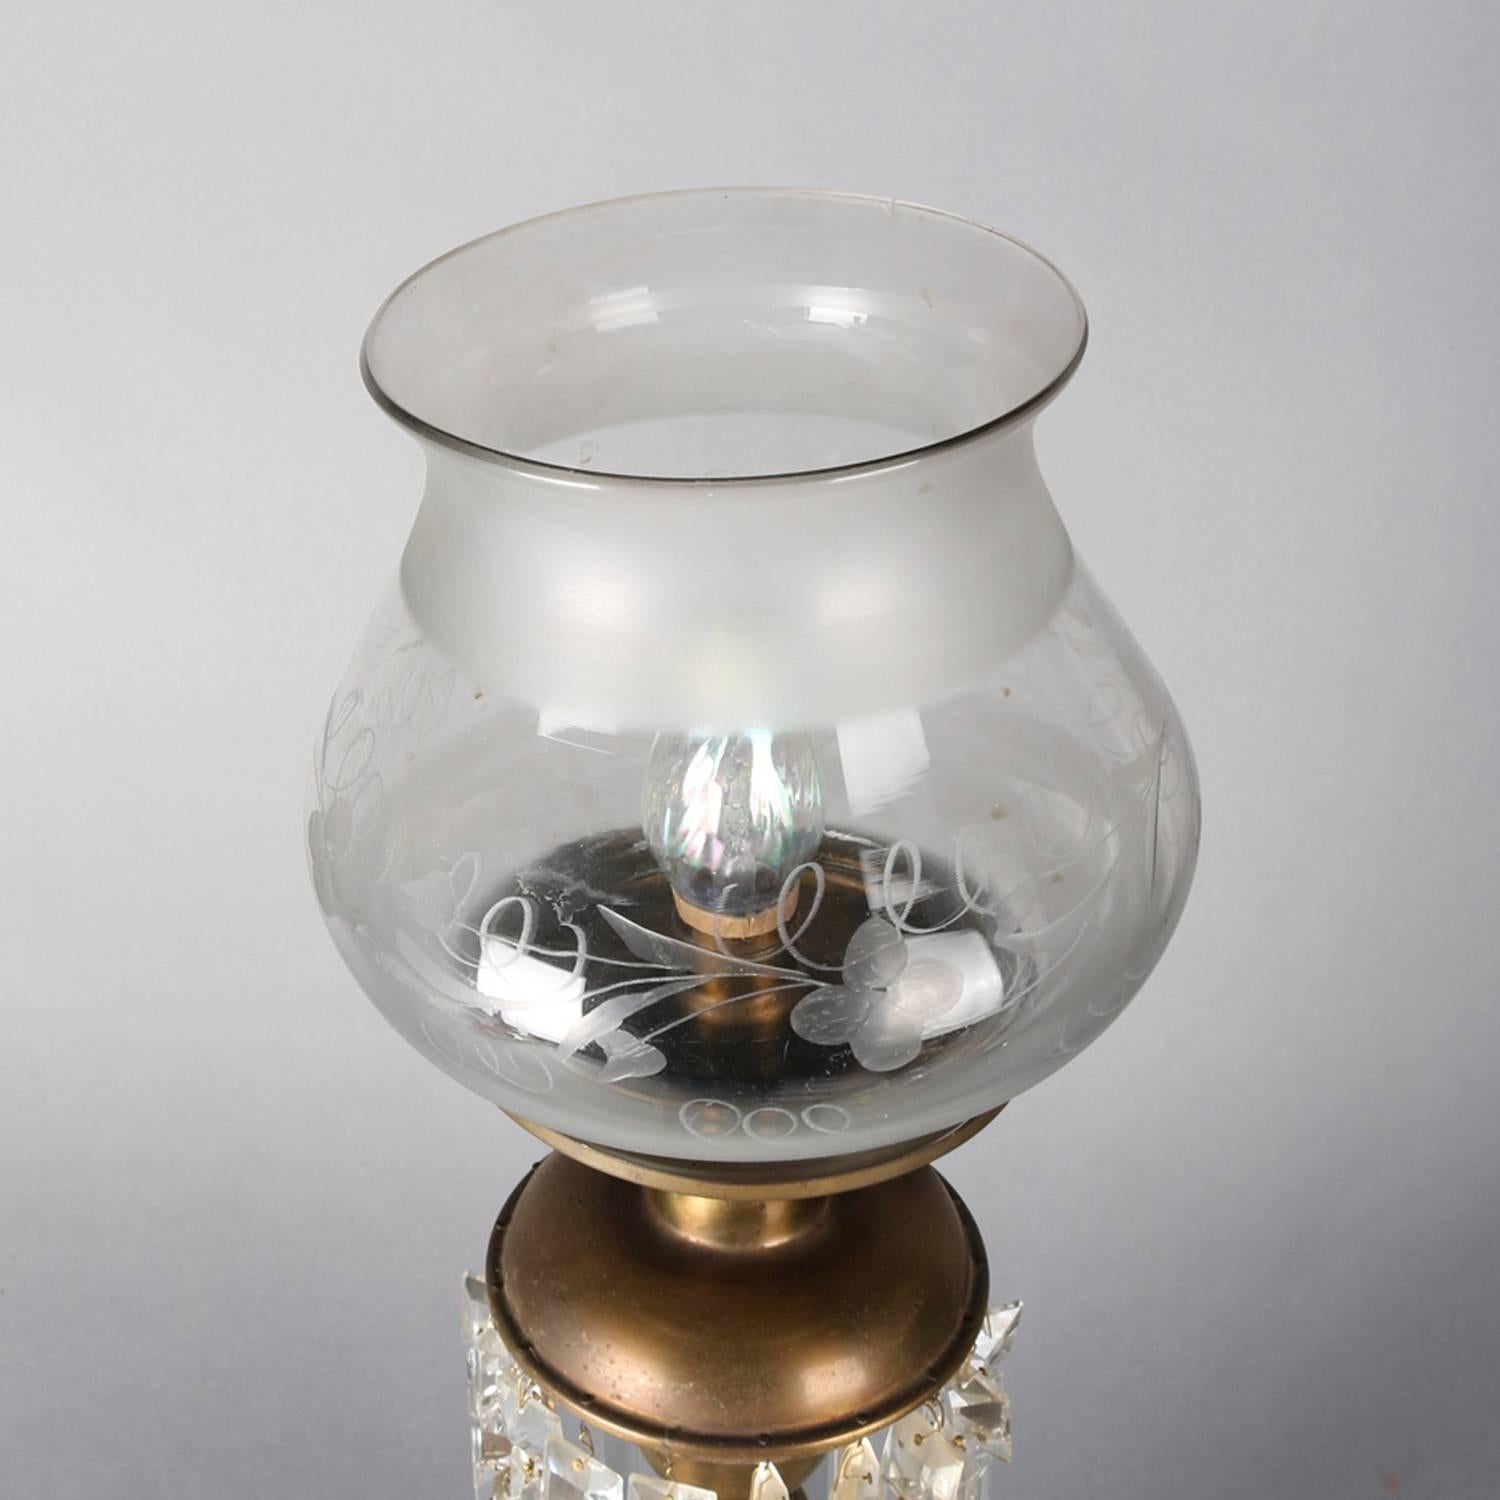 Metal Antique Gilt, Marble and Crystal Electrified Solar Lamp, 19th Century